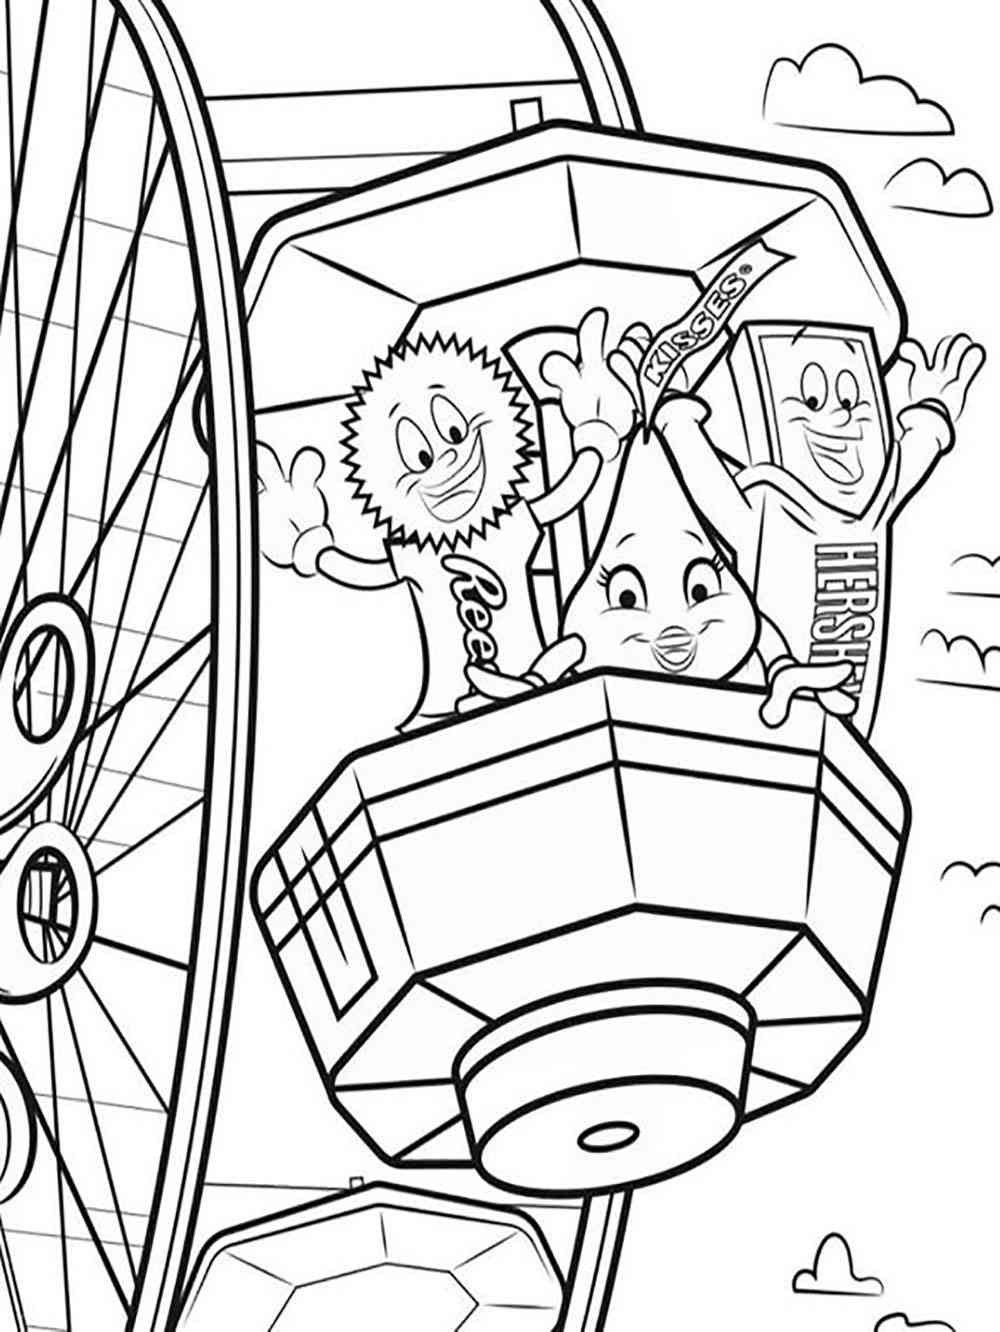 Ferris Wheel coloring pages